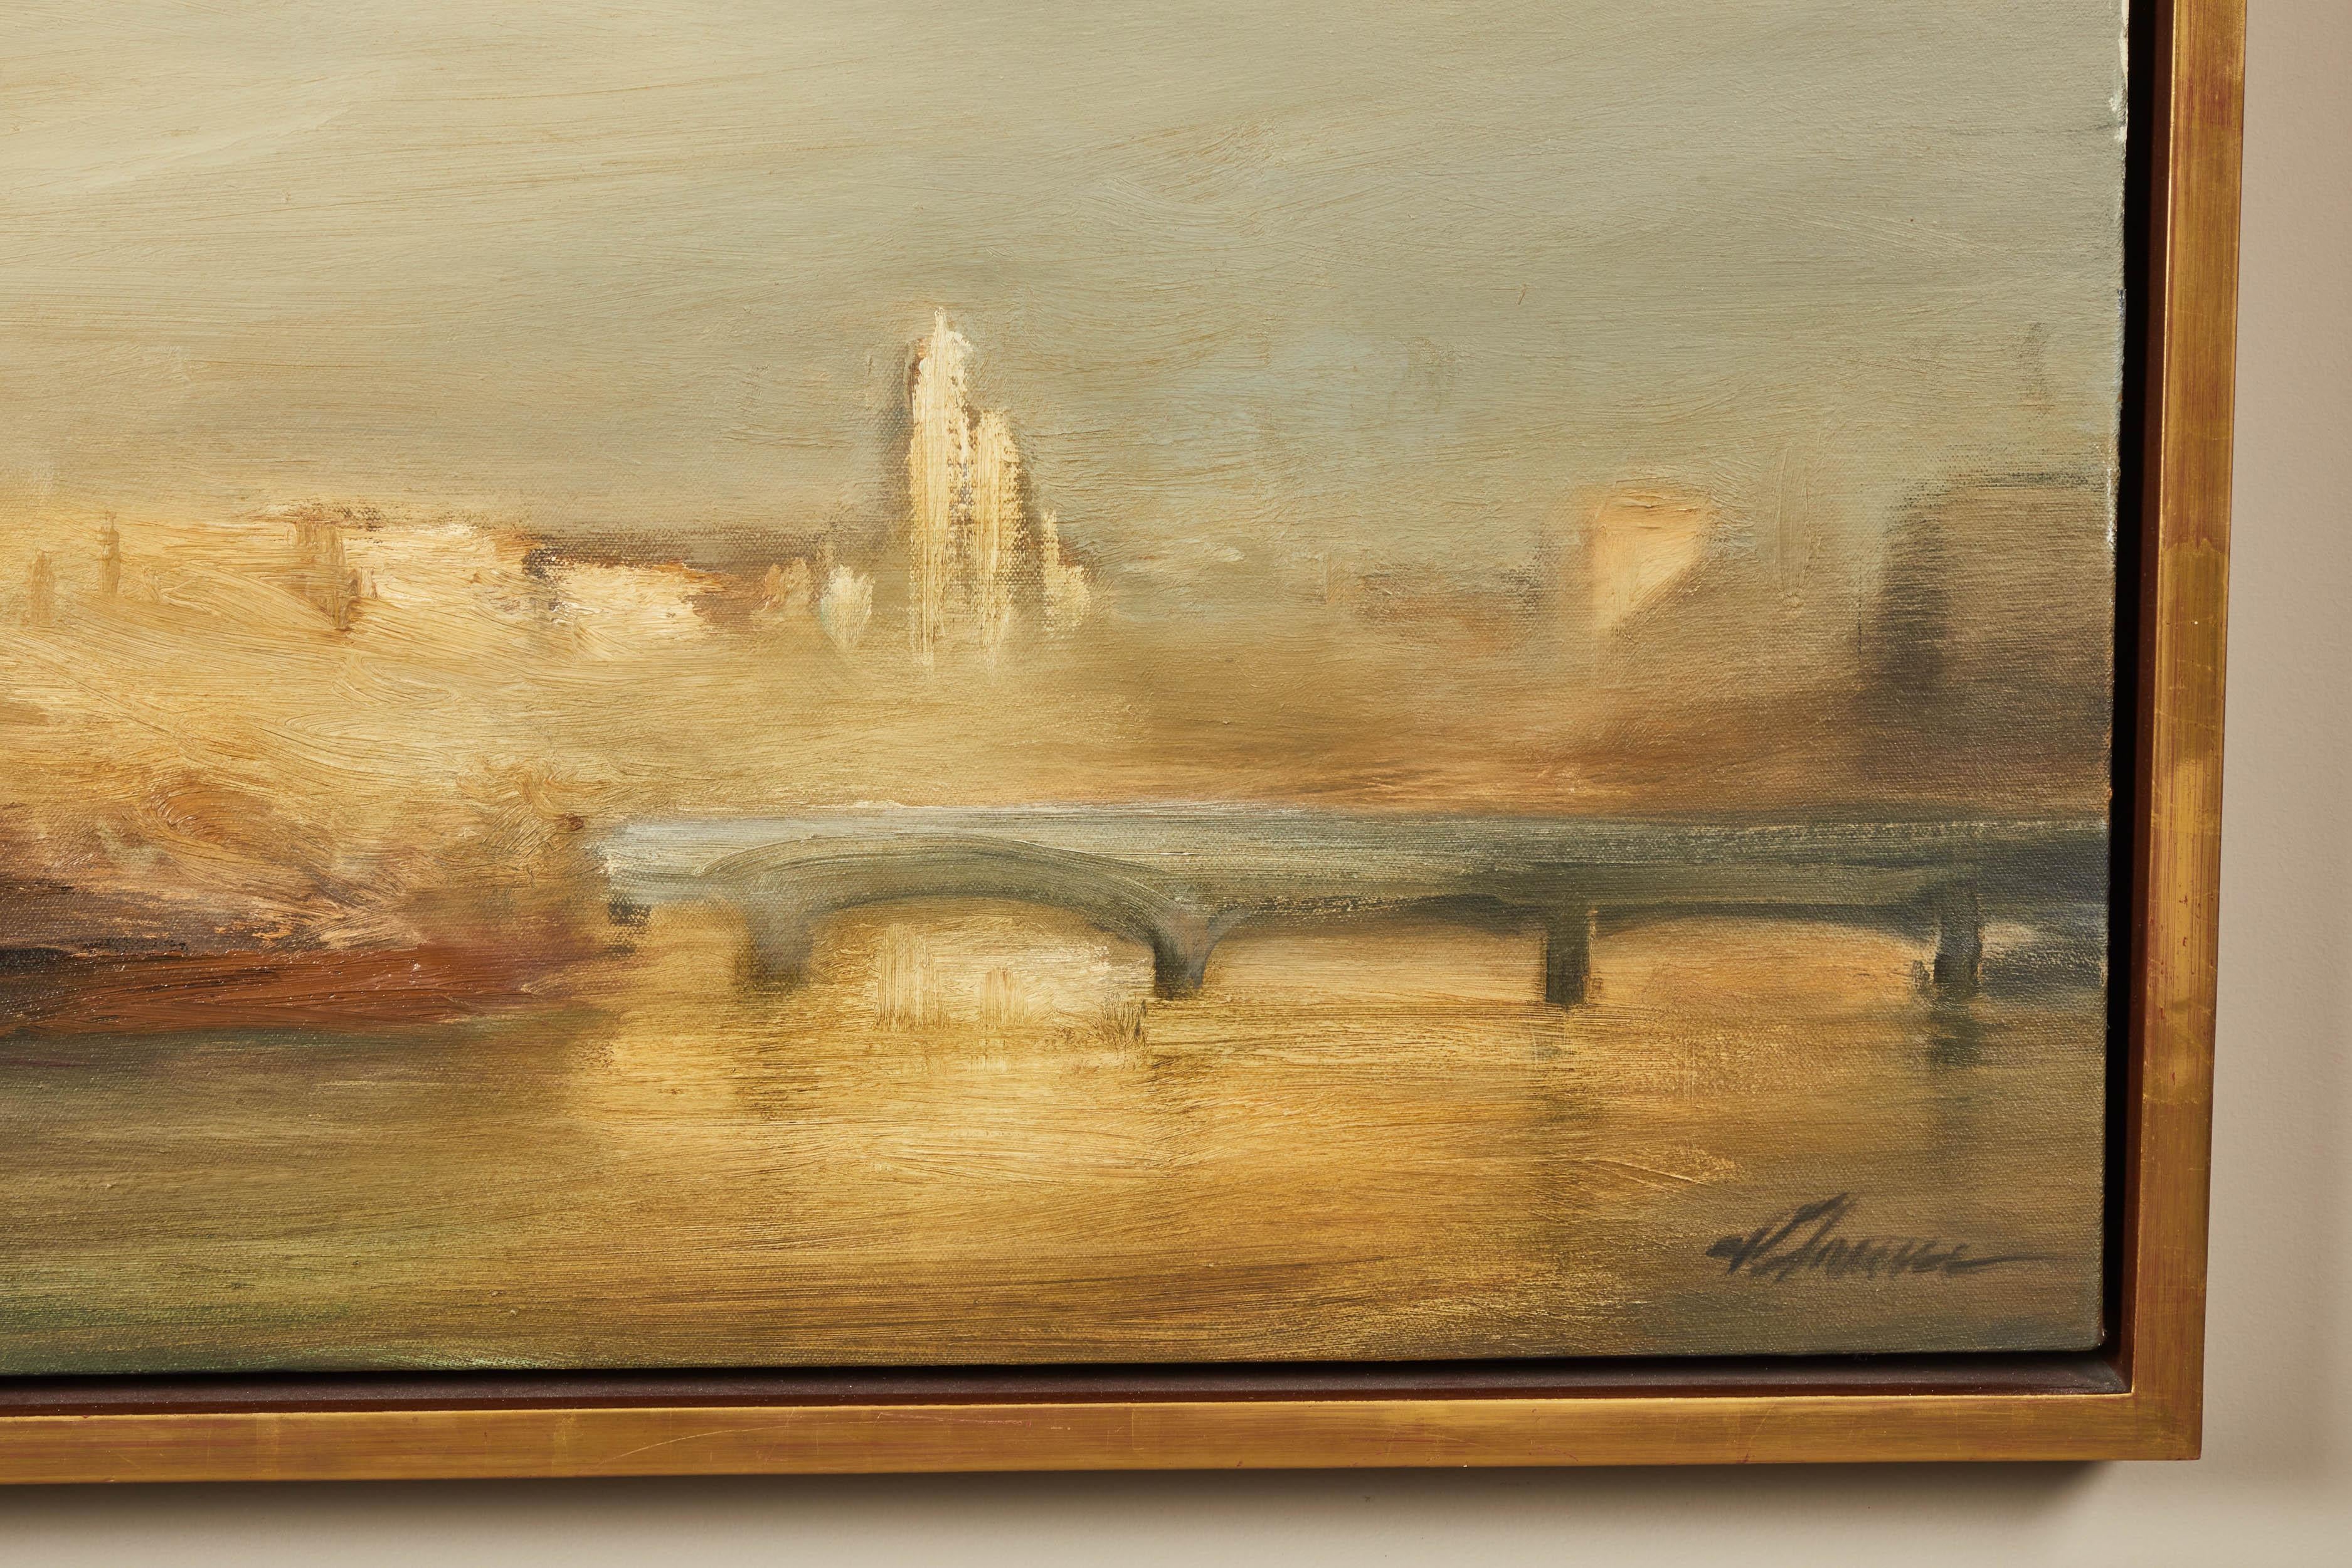 ‘The Calm’ by Ray Turner (1958-) painted in 2001, exhibited at DNFA Gallery as part of The Seine River Paintings collection of work.